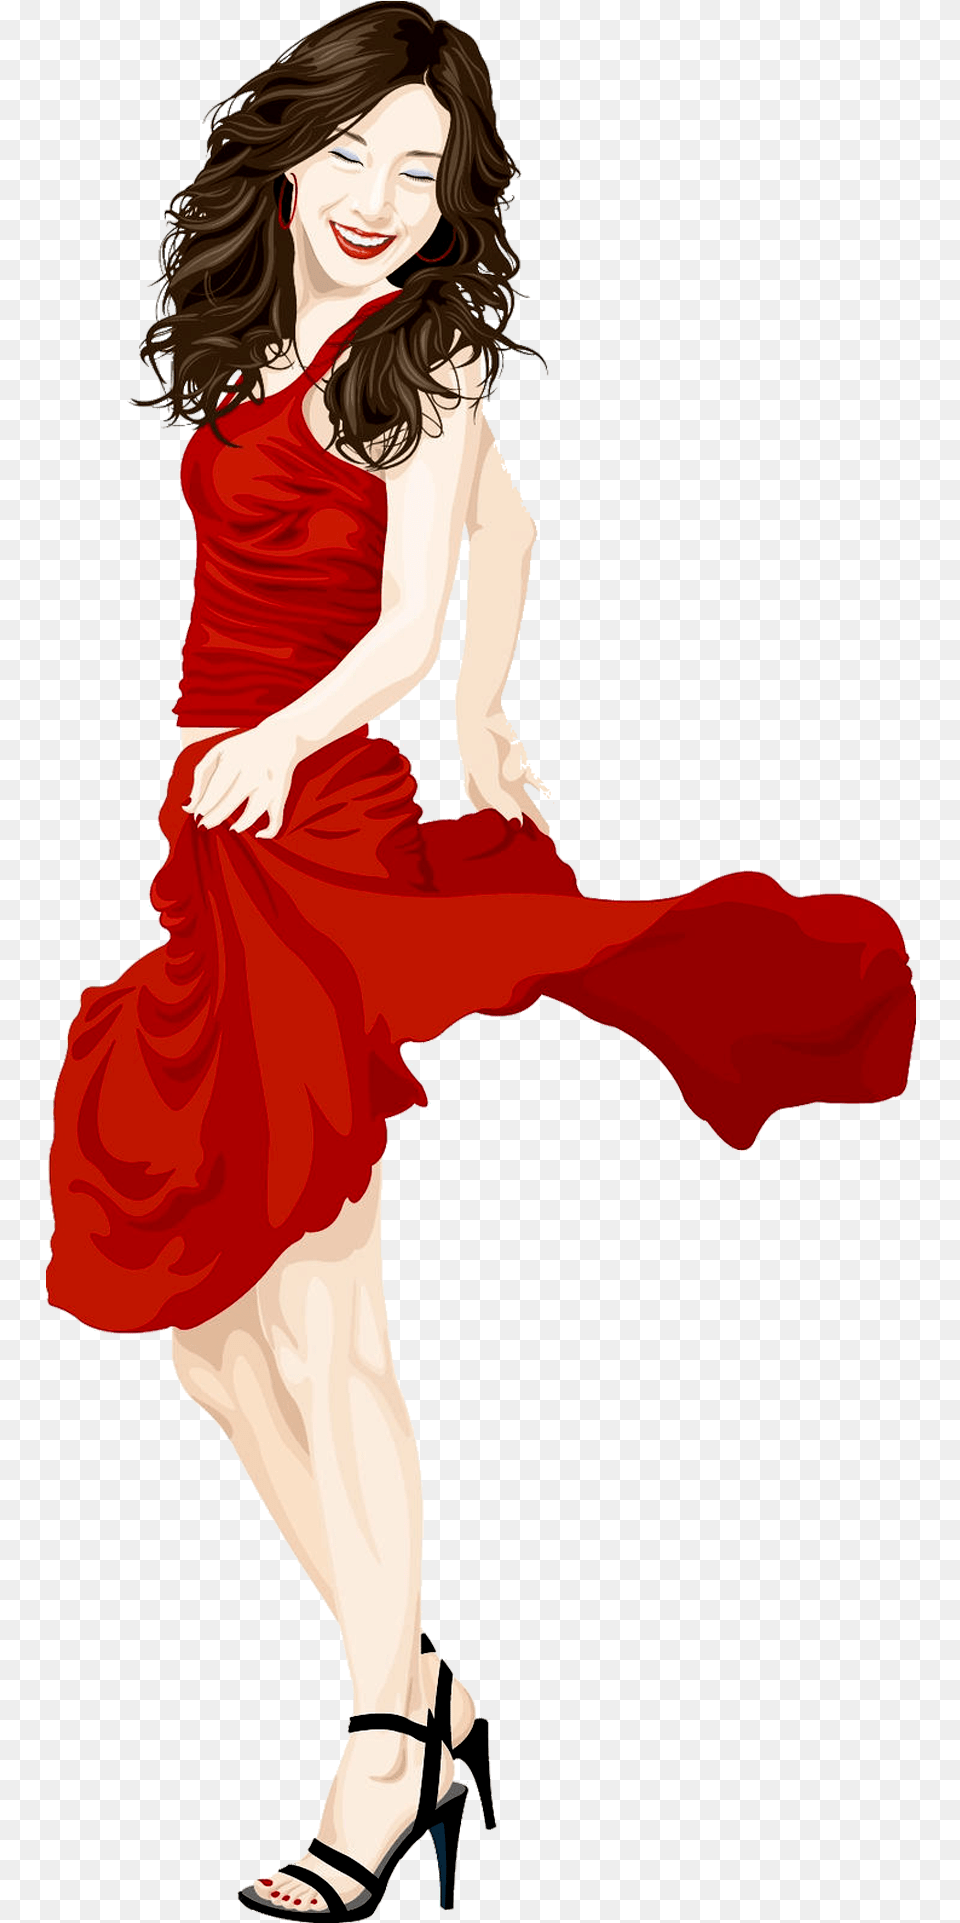 Download Vector Graphics, Footwear, Clothing, Shoe, Dress Png Image